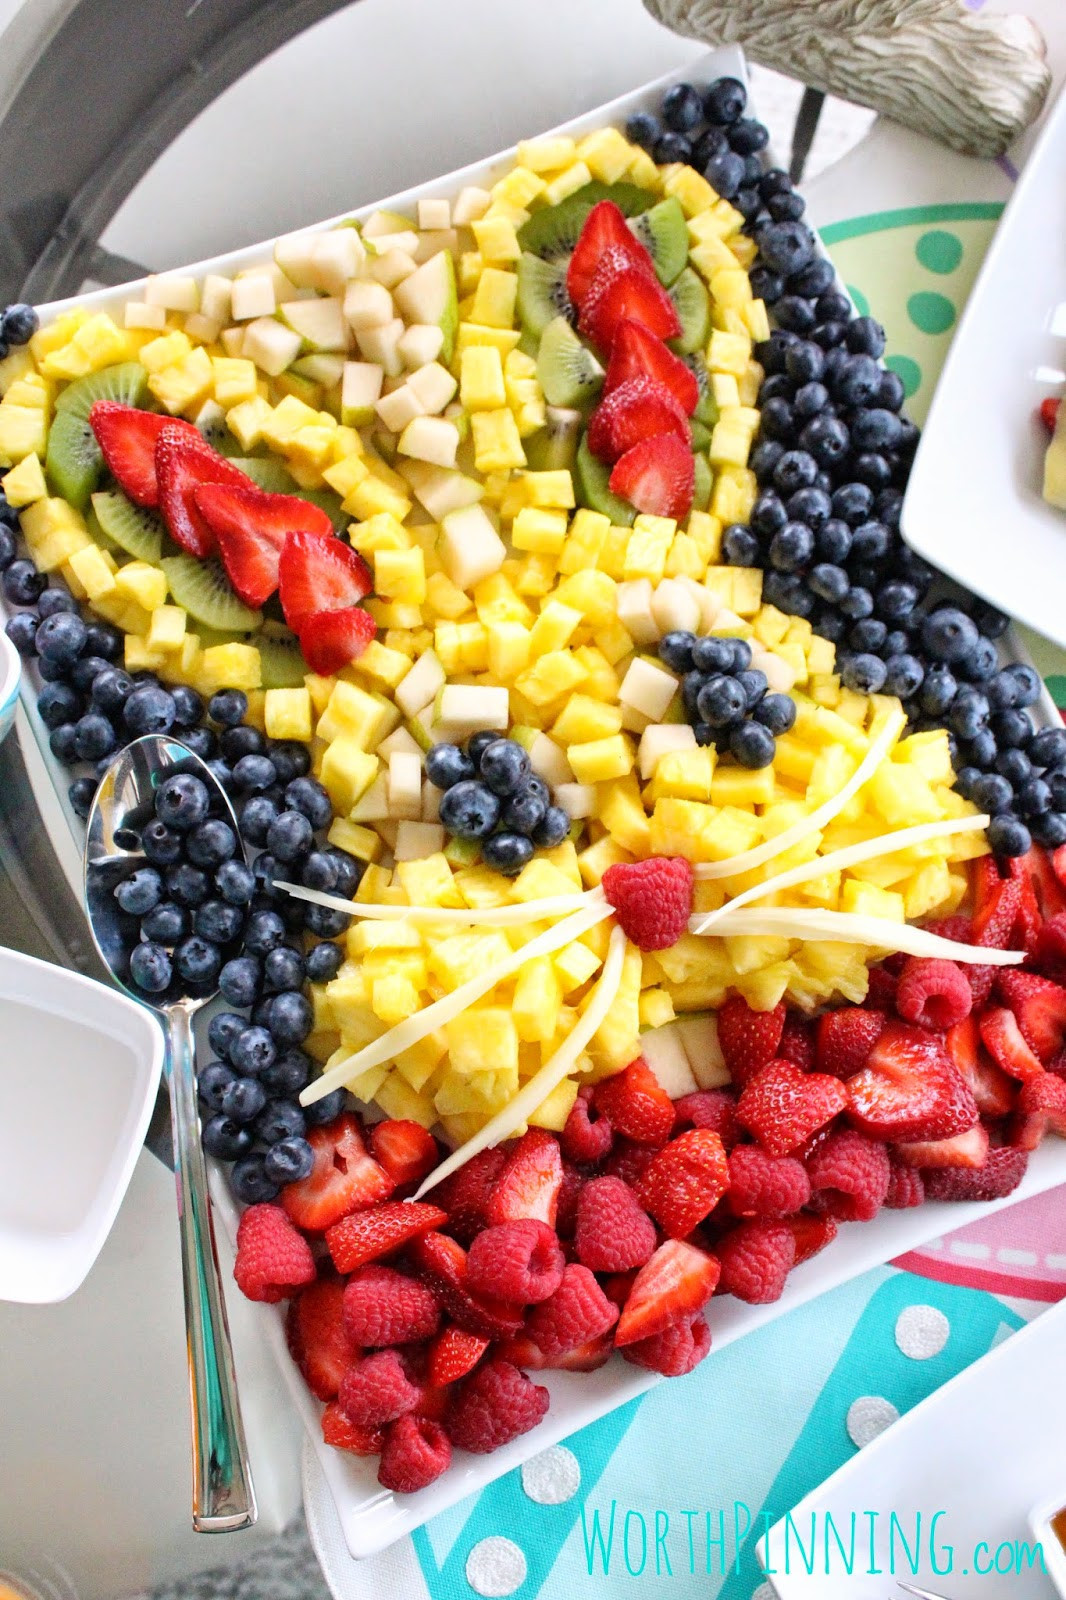 Easter Fruit Tray Ideas
 30 Ideas for Fruit Salads for Easter Brunch Best Round